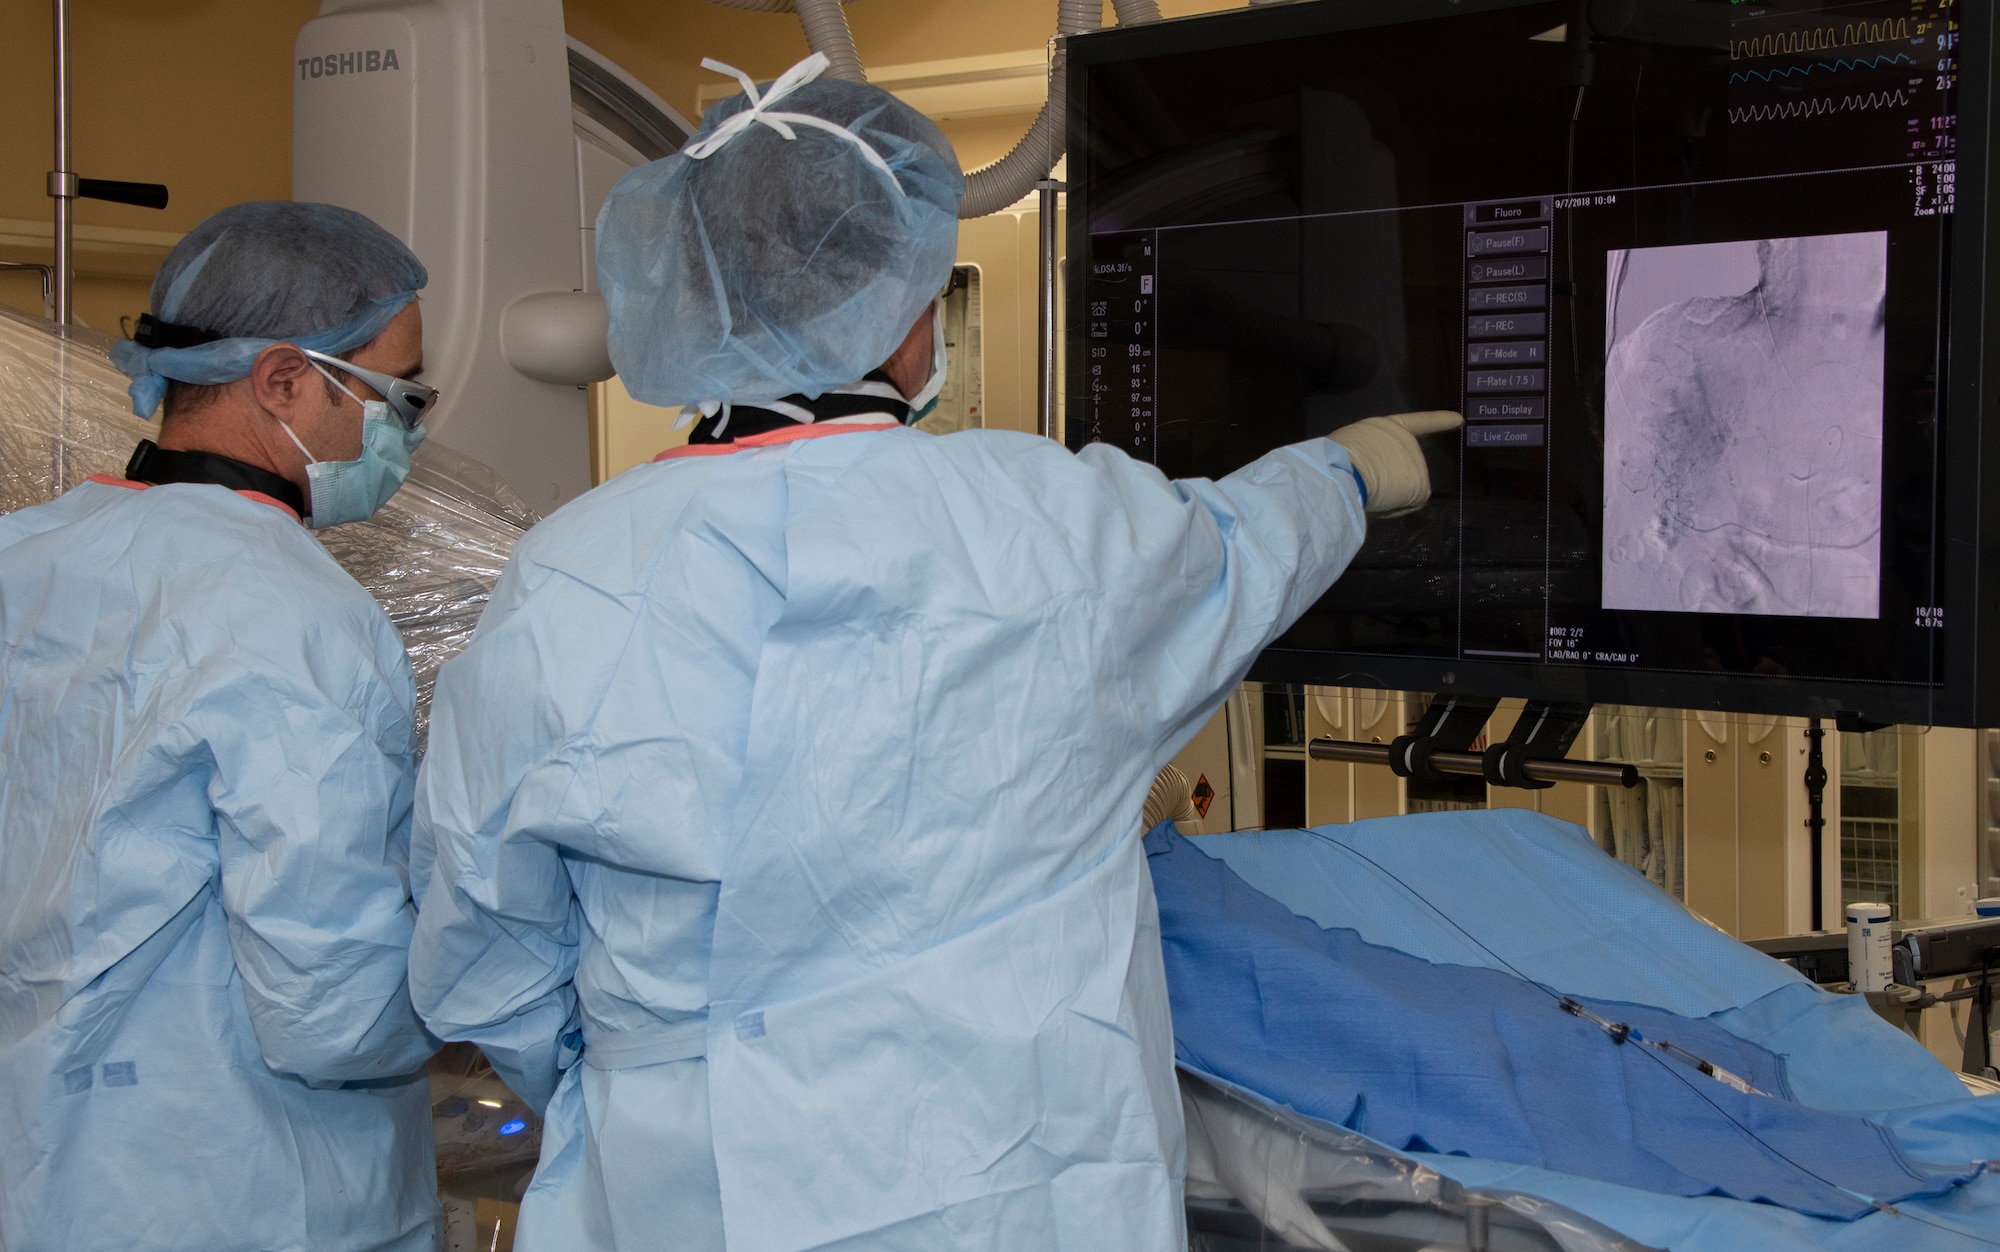 U.S. Air Force Lt. Col. (Dr.) David Gover and Maj. (Dr.) Jason Hoskins, 60th Medical Group interventional radiologists at David Grant U.S. Air Force Medical Center conduct an Yttrium-90 radioembolization procedure on a patient with liver cancer, Sept. 7, 2018, Travis Air Force Base, Calif. The Y-90 radioembolization is an advanced and minimally invasive method utilized for this disease by delivering millions of tiny radioactive beads inside the blood vessels that feed a tumor. The high dose of targeted radiation prospectively kills the tumor while sparing normal tissue. This was the first time the treatment was performed at DGMC. (Photo altered for security reasons) (U.S. Air Force photo illustration by Heide Couch)